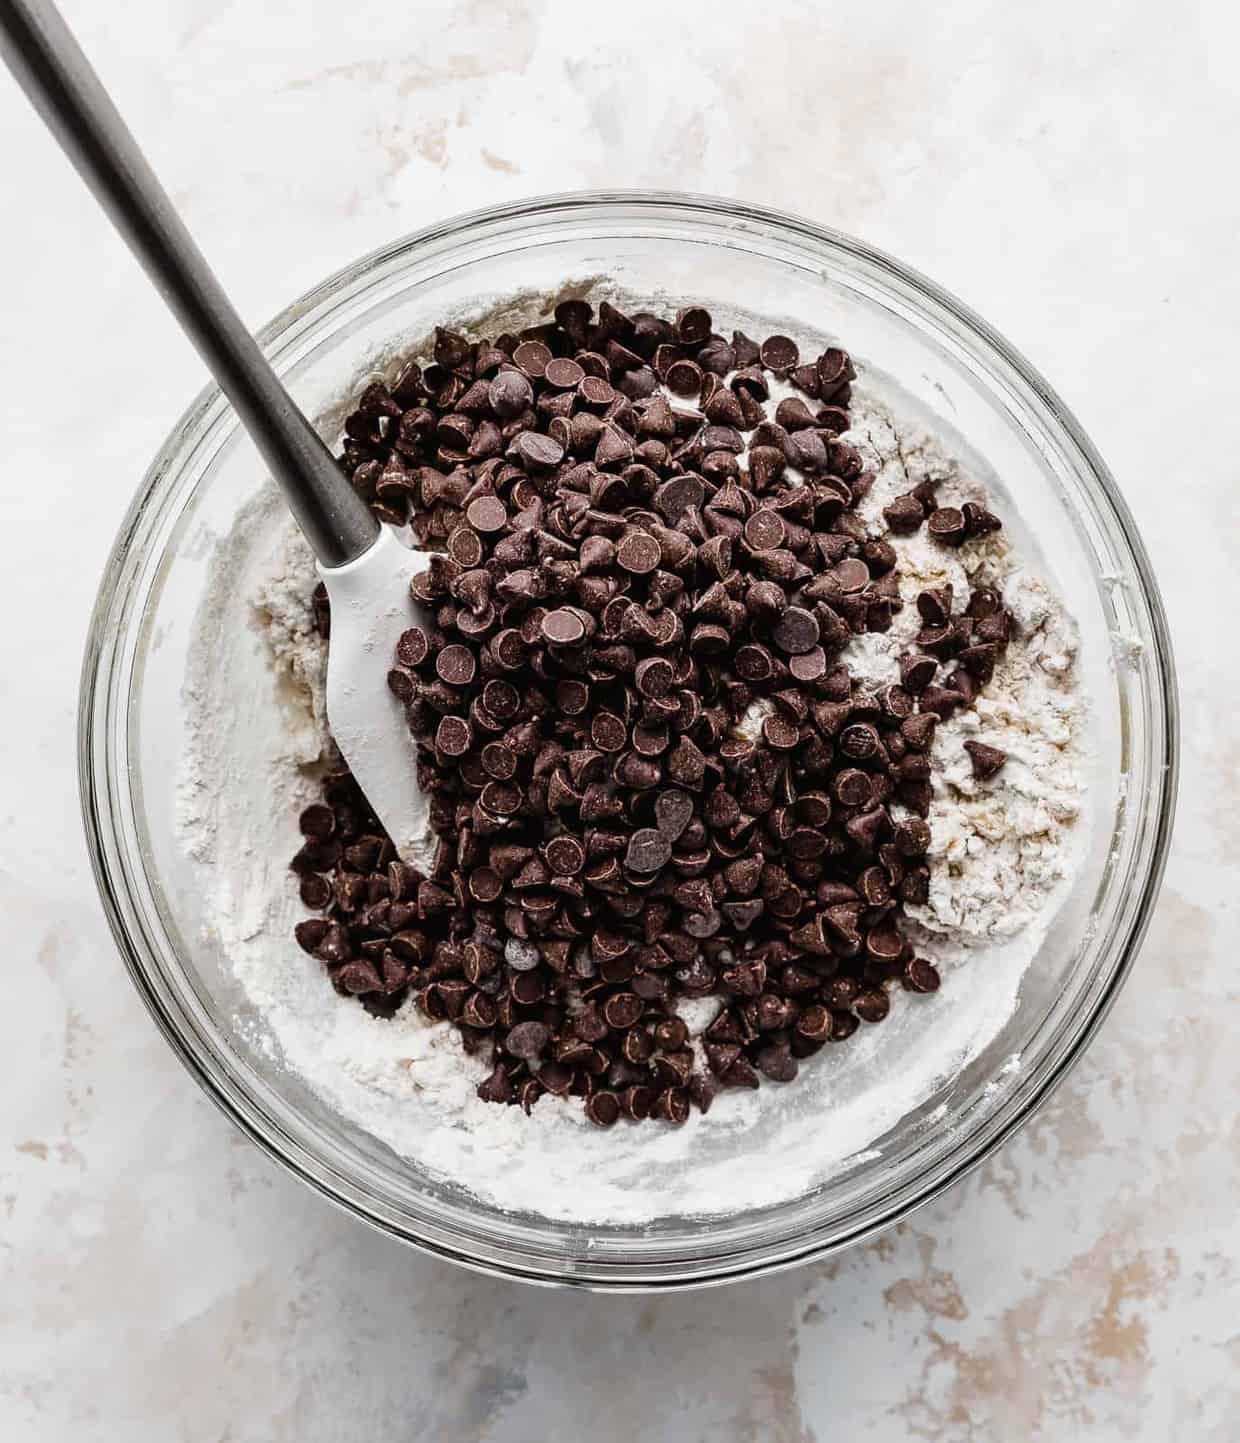 Chocolate chips overtop a mixture of dry ingredients in a glass bowl.